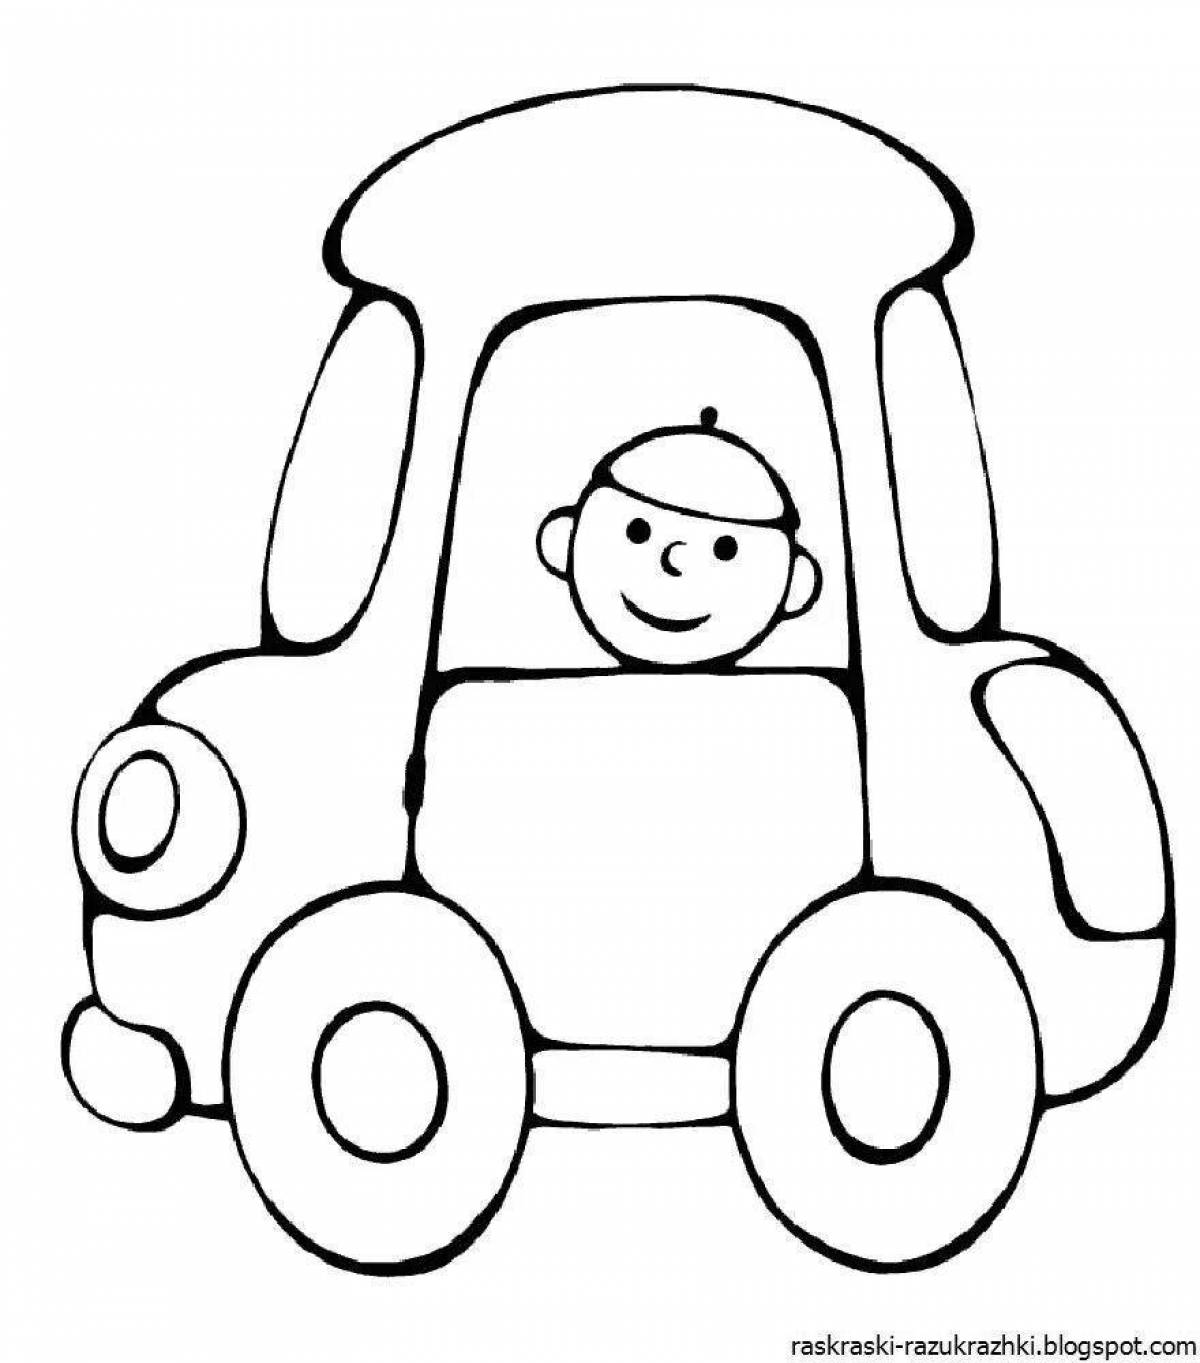 Coloring book adorable cars for boys 4 years old